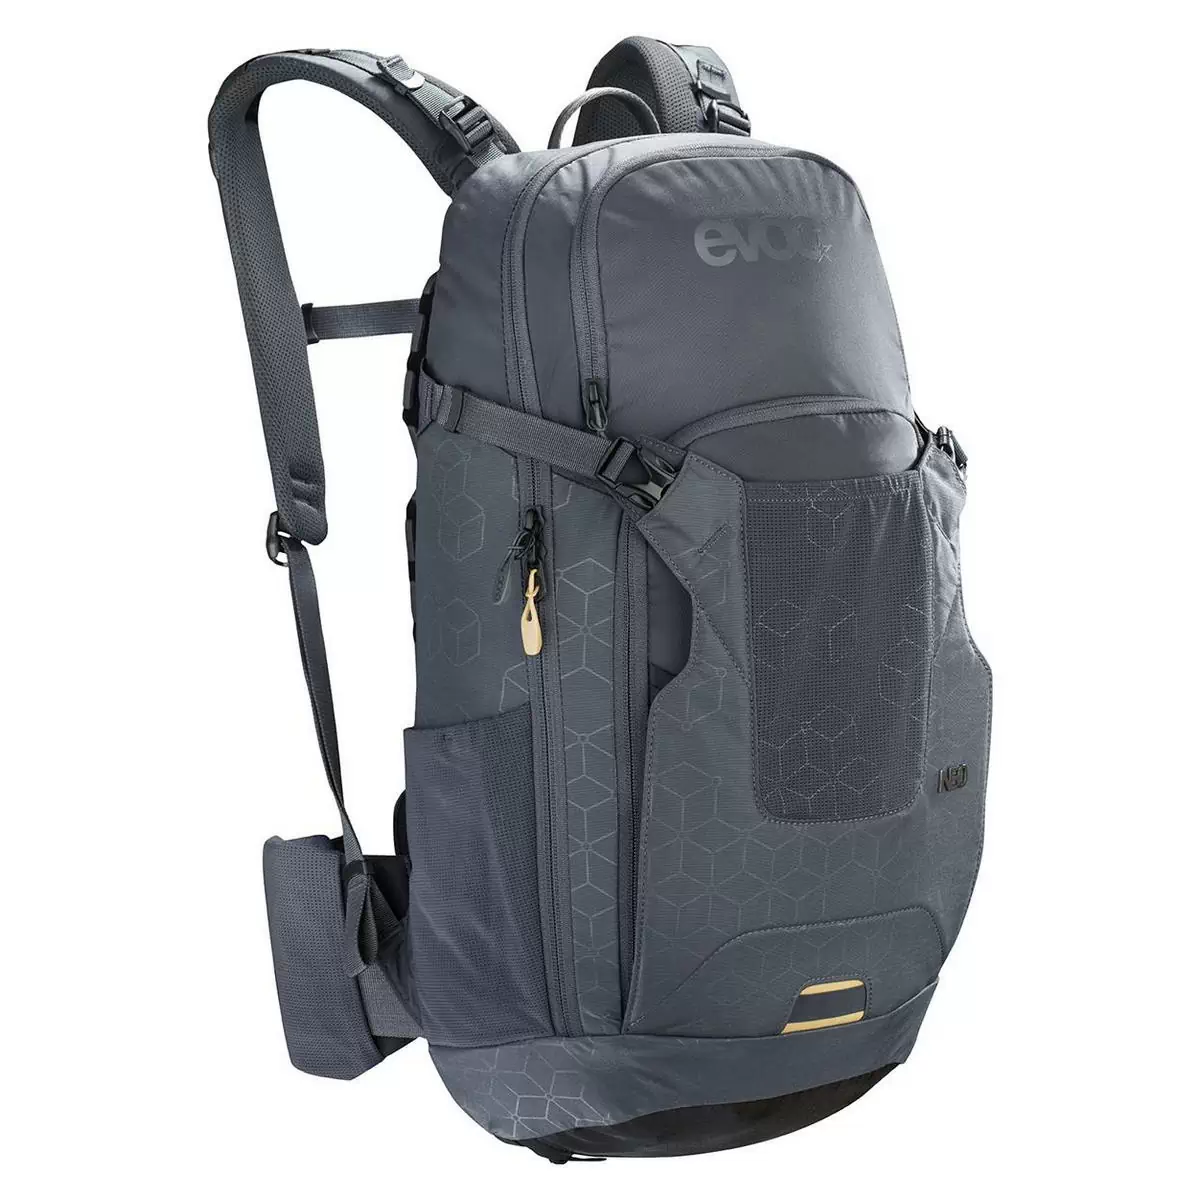 Neo backpack 16 lt carbon gray with back protector size S/M - image